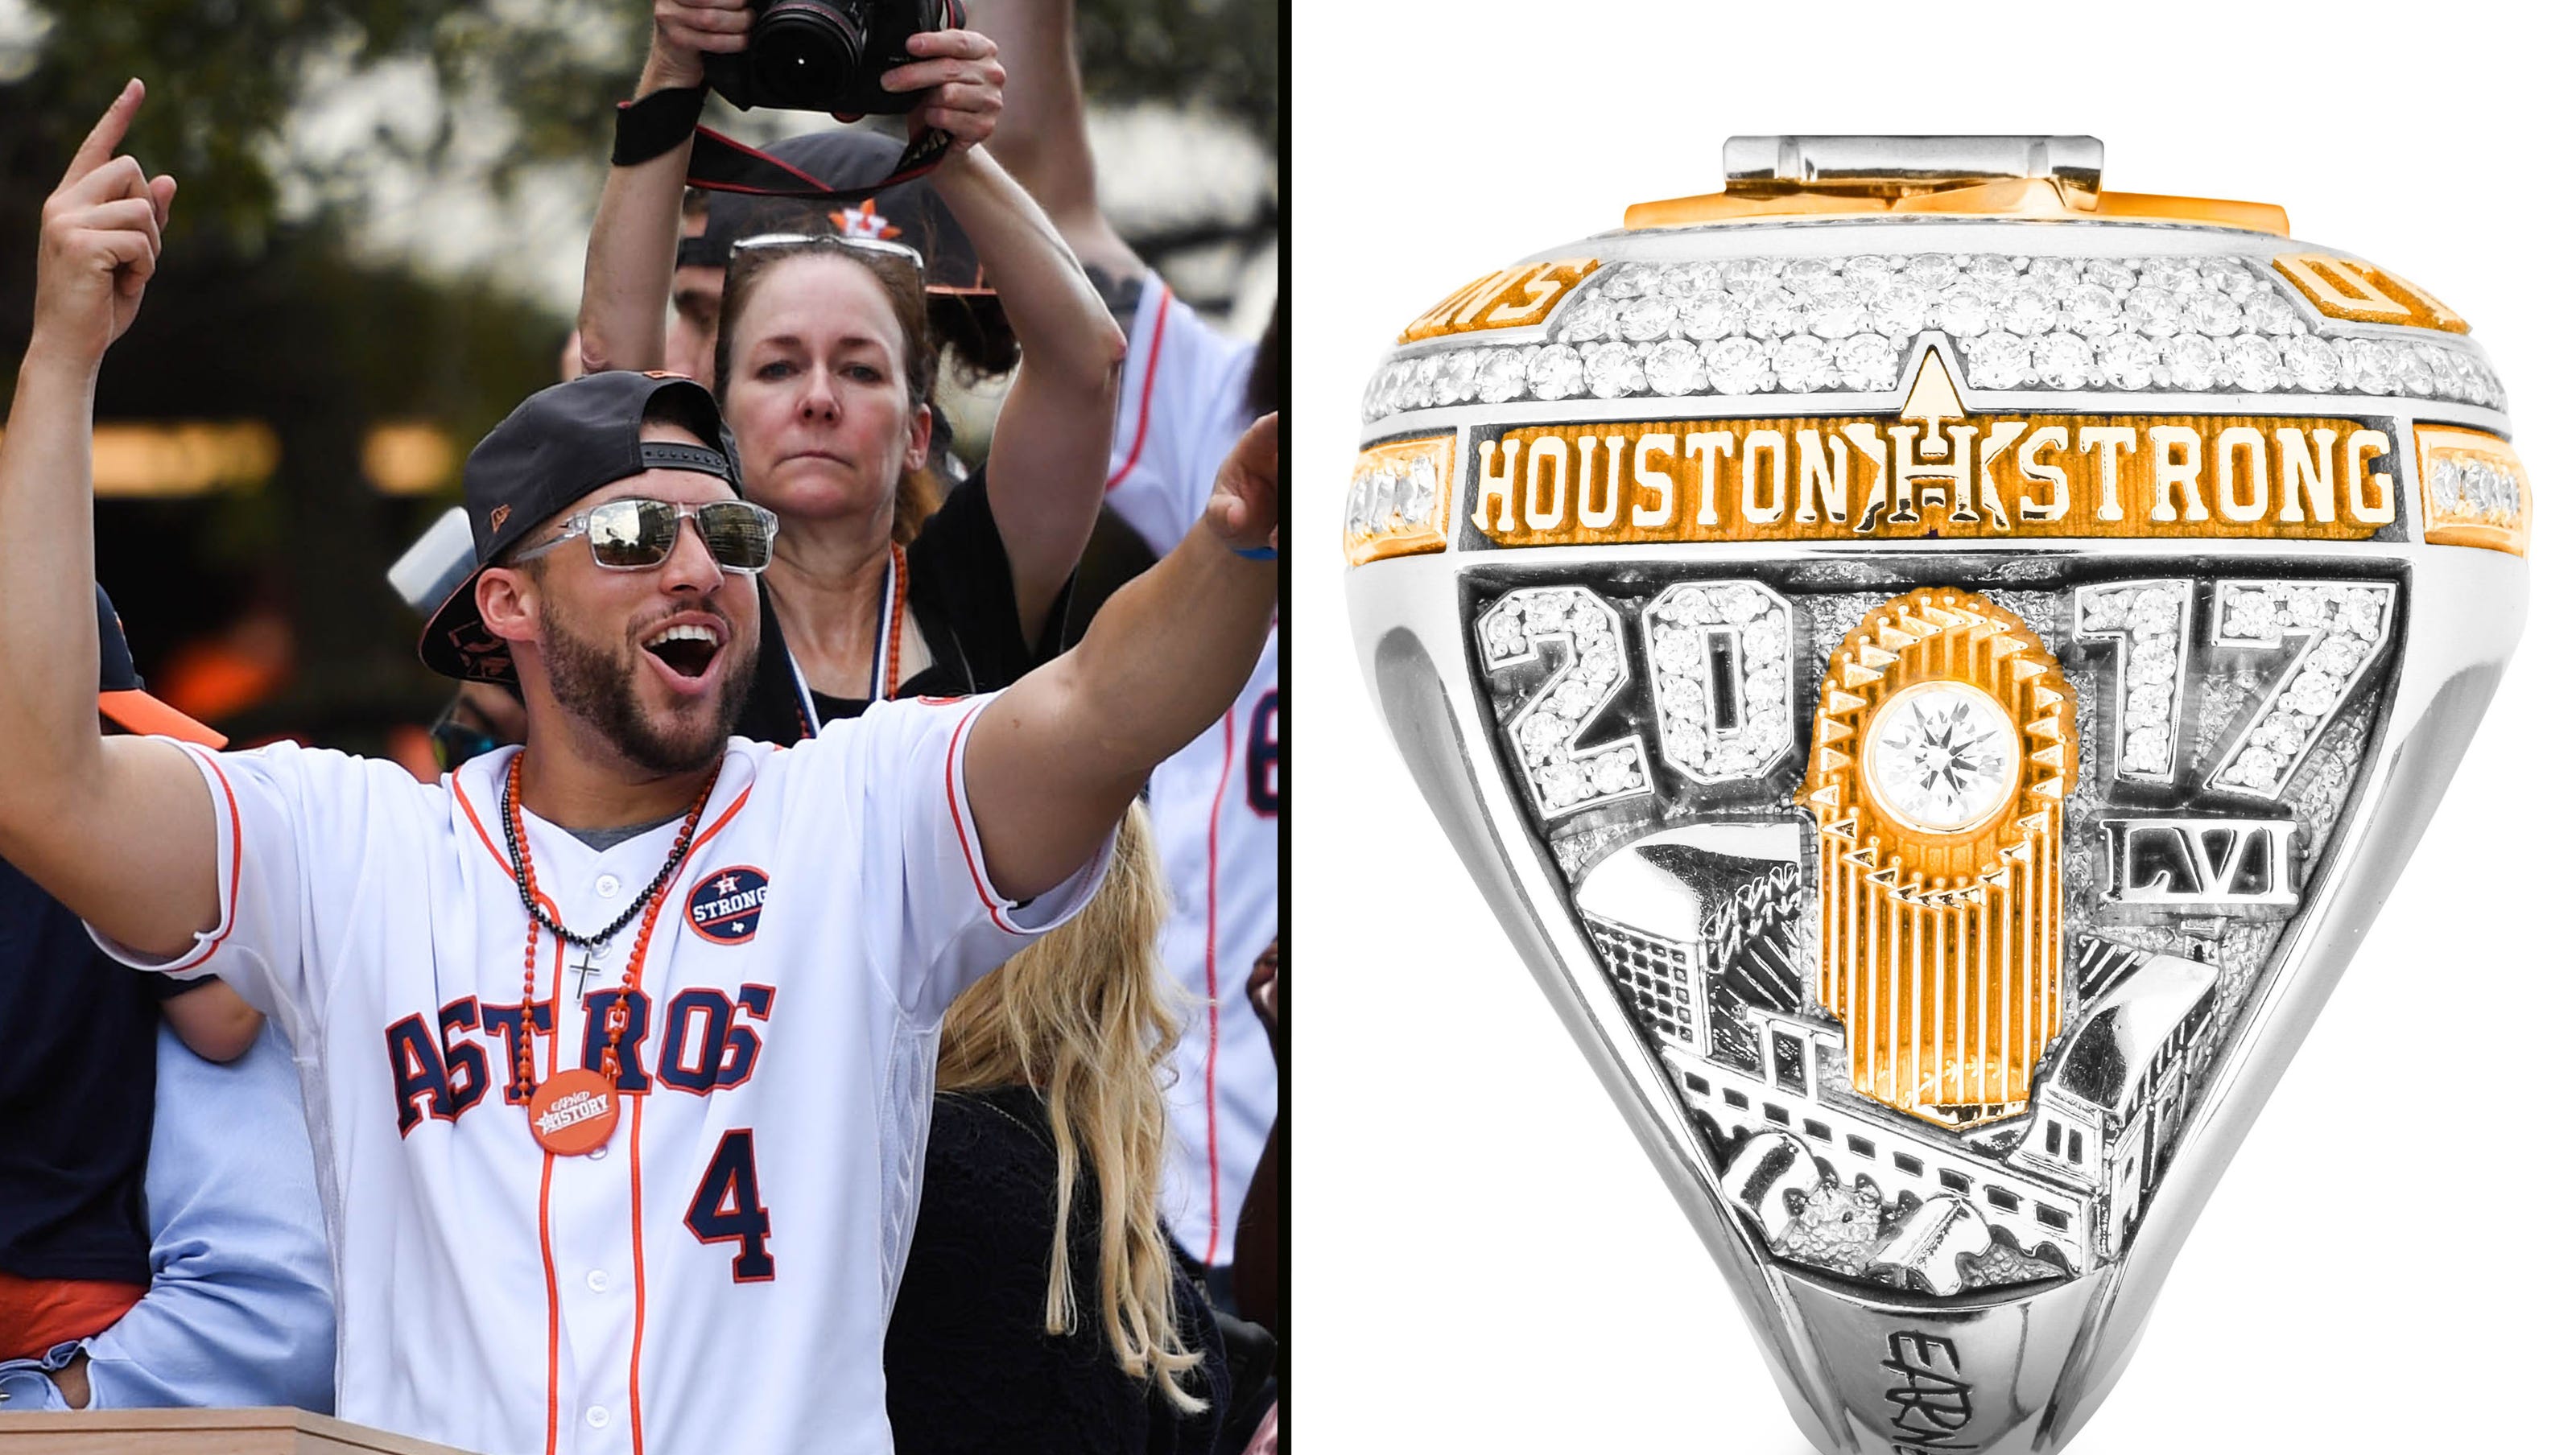 10 amazing details on Astros' World Series rings